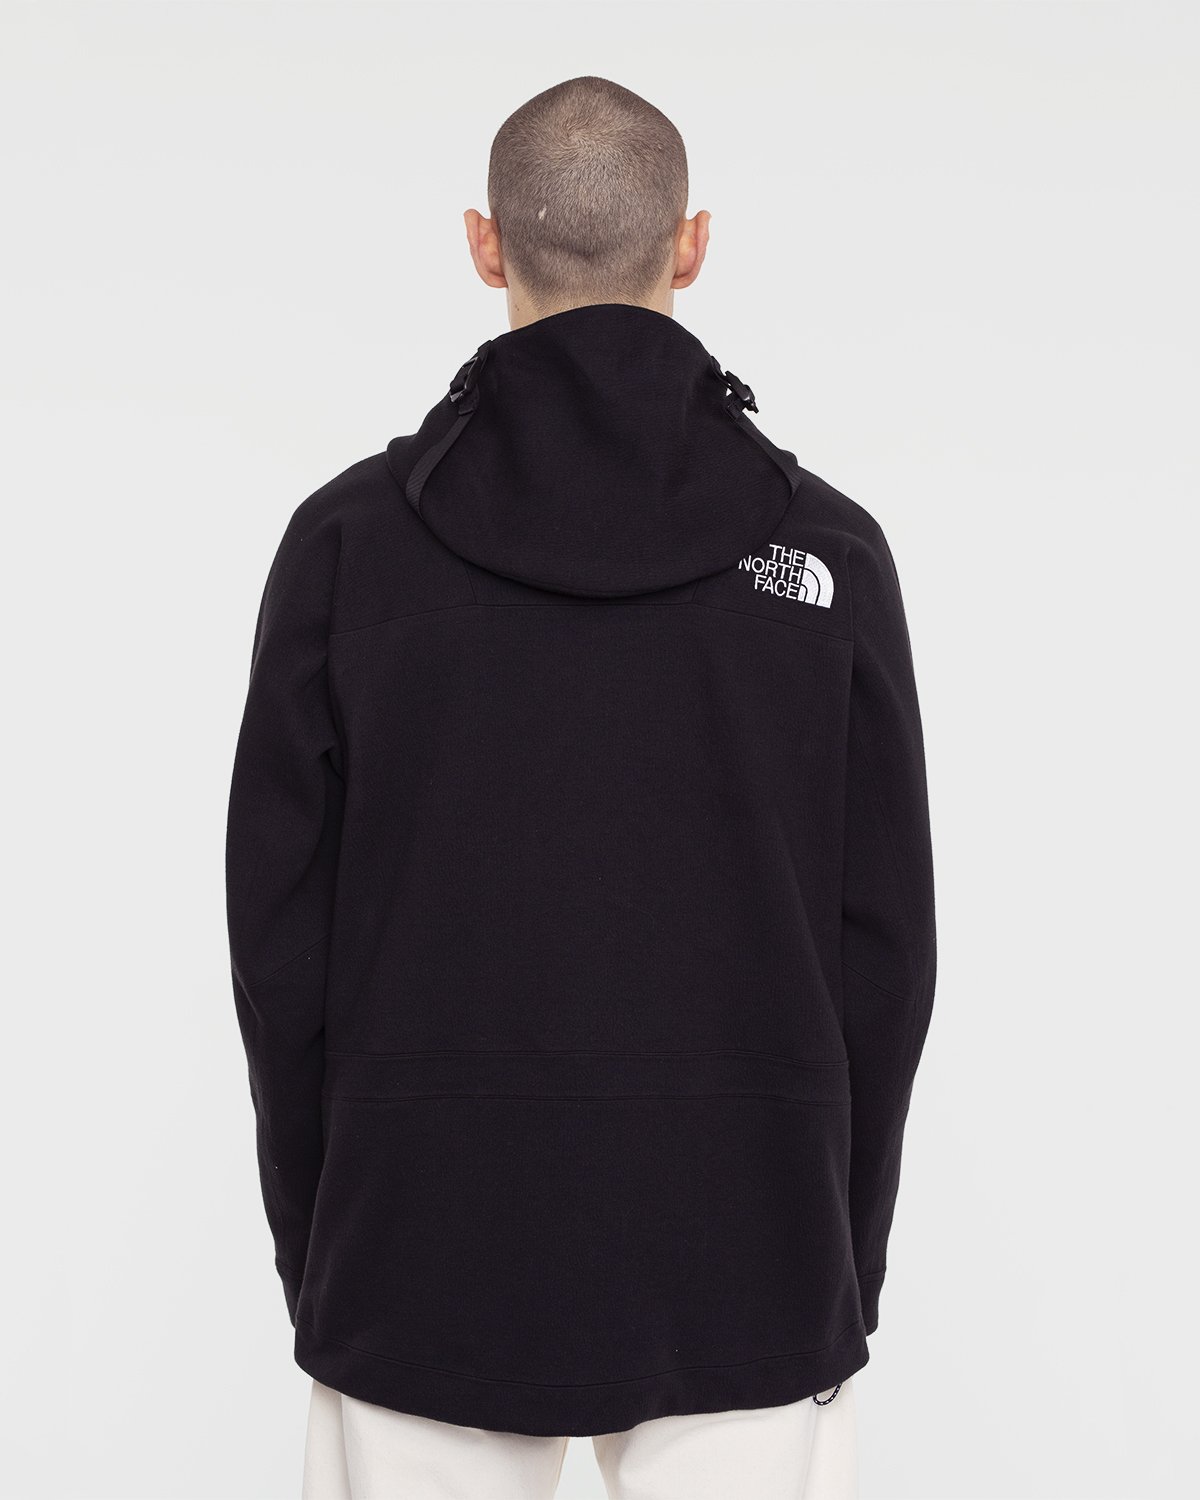 The North Face - Black Series Spacer Knit Mountain Light Jacket Black - Clothing - Black - Image 5